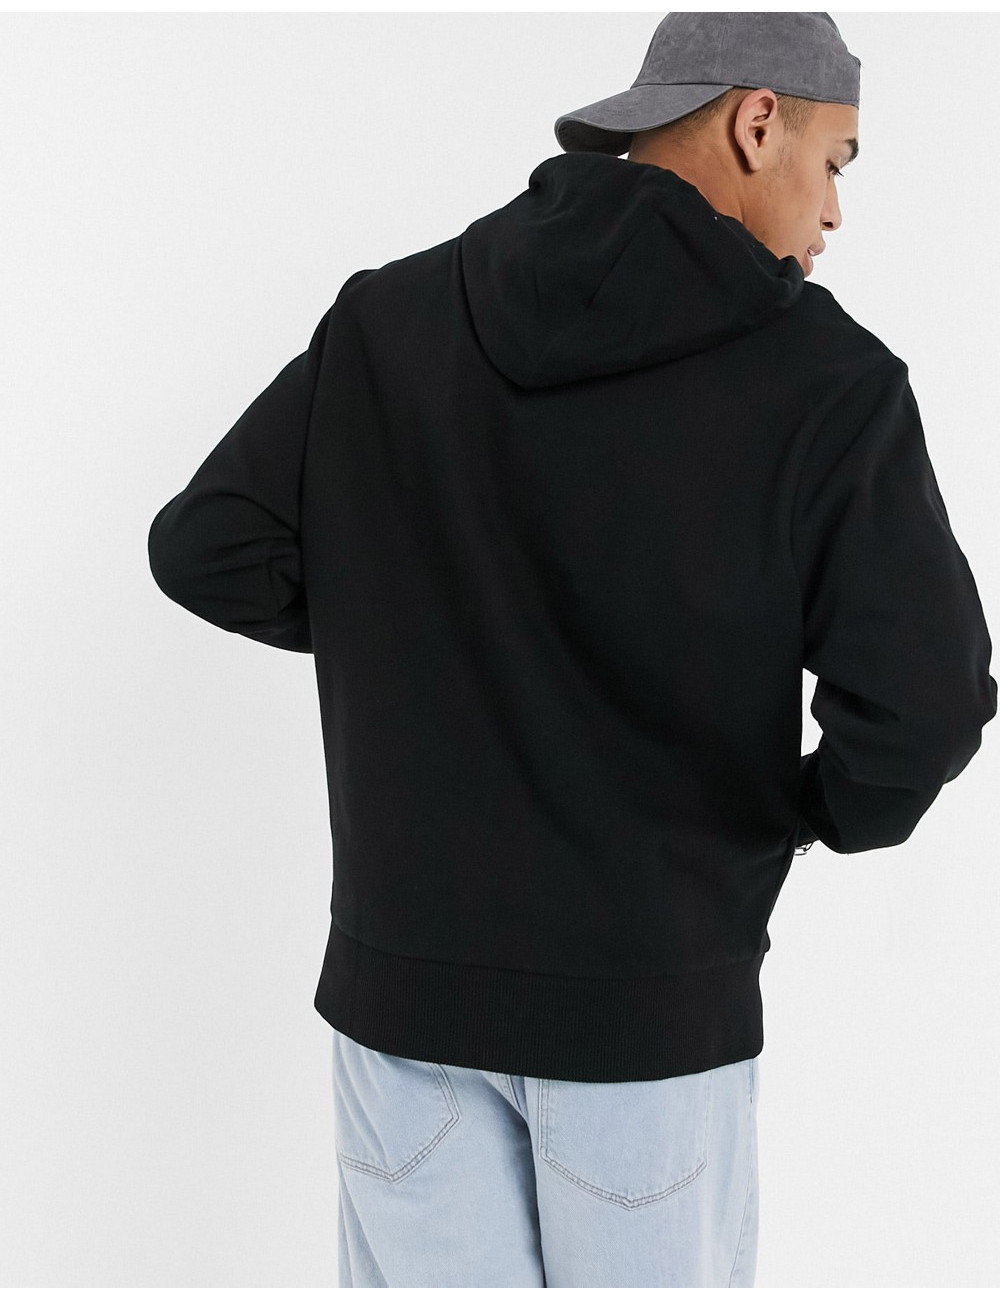 COLLUSION hoodie in black